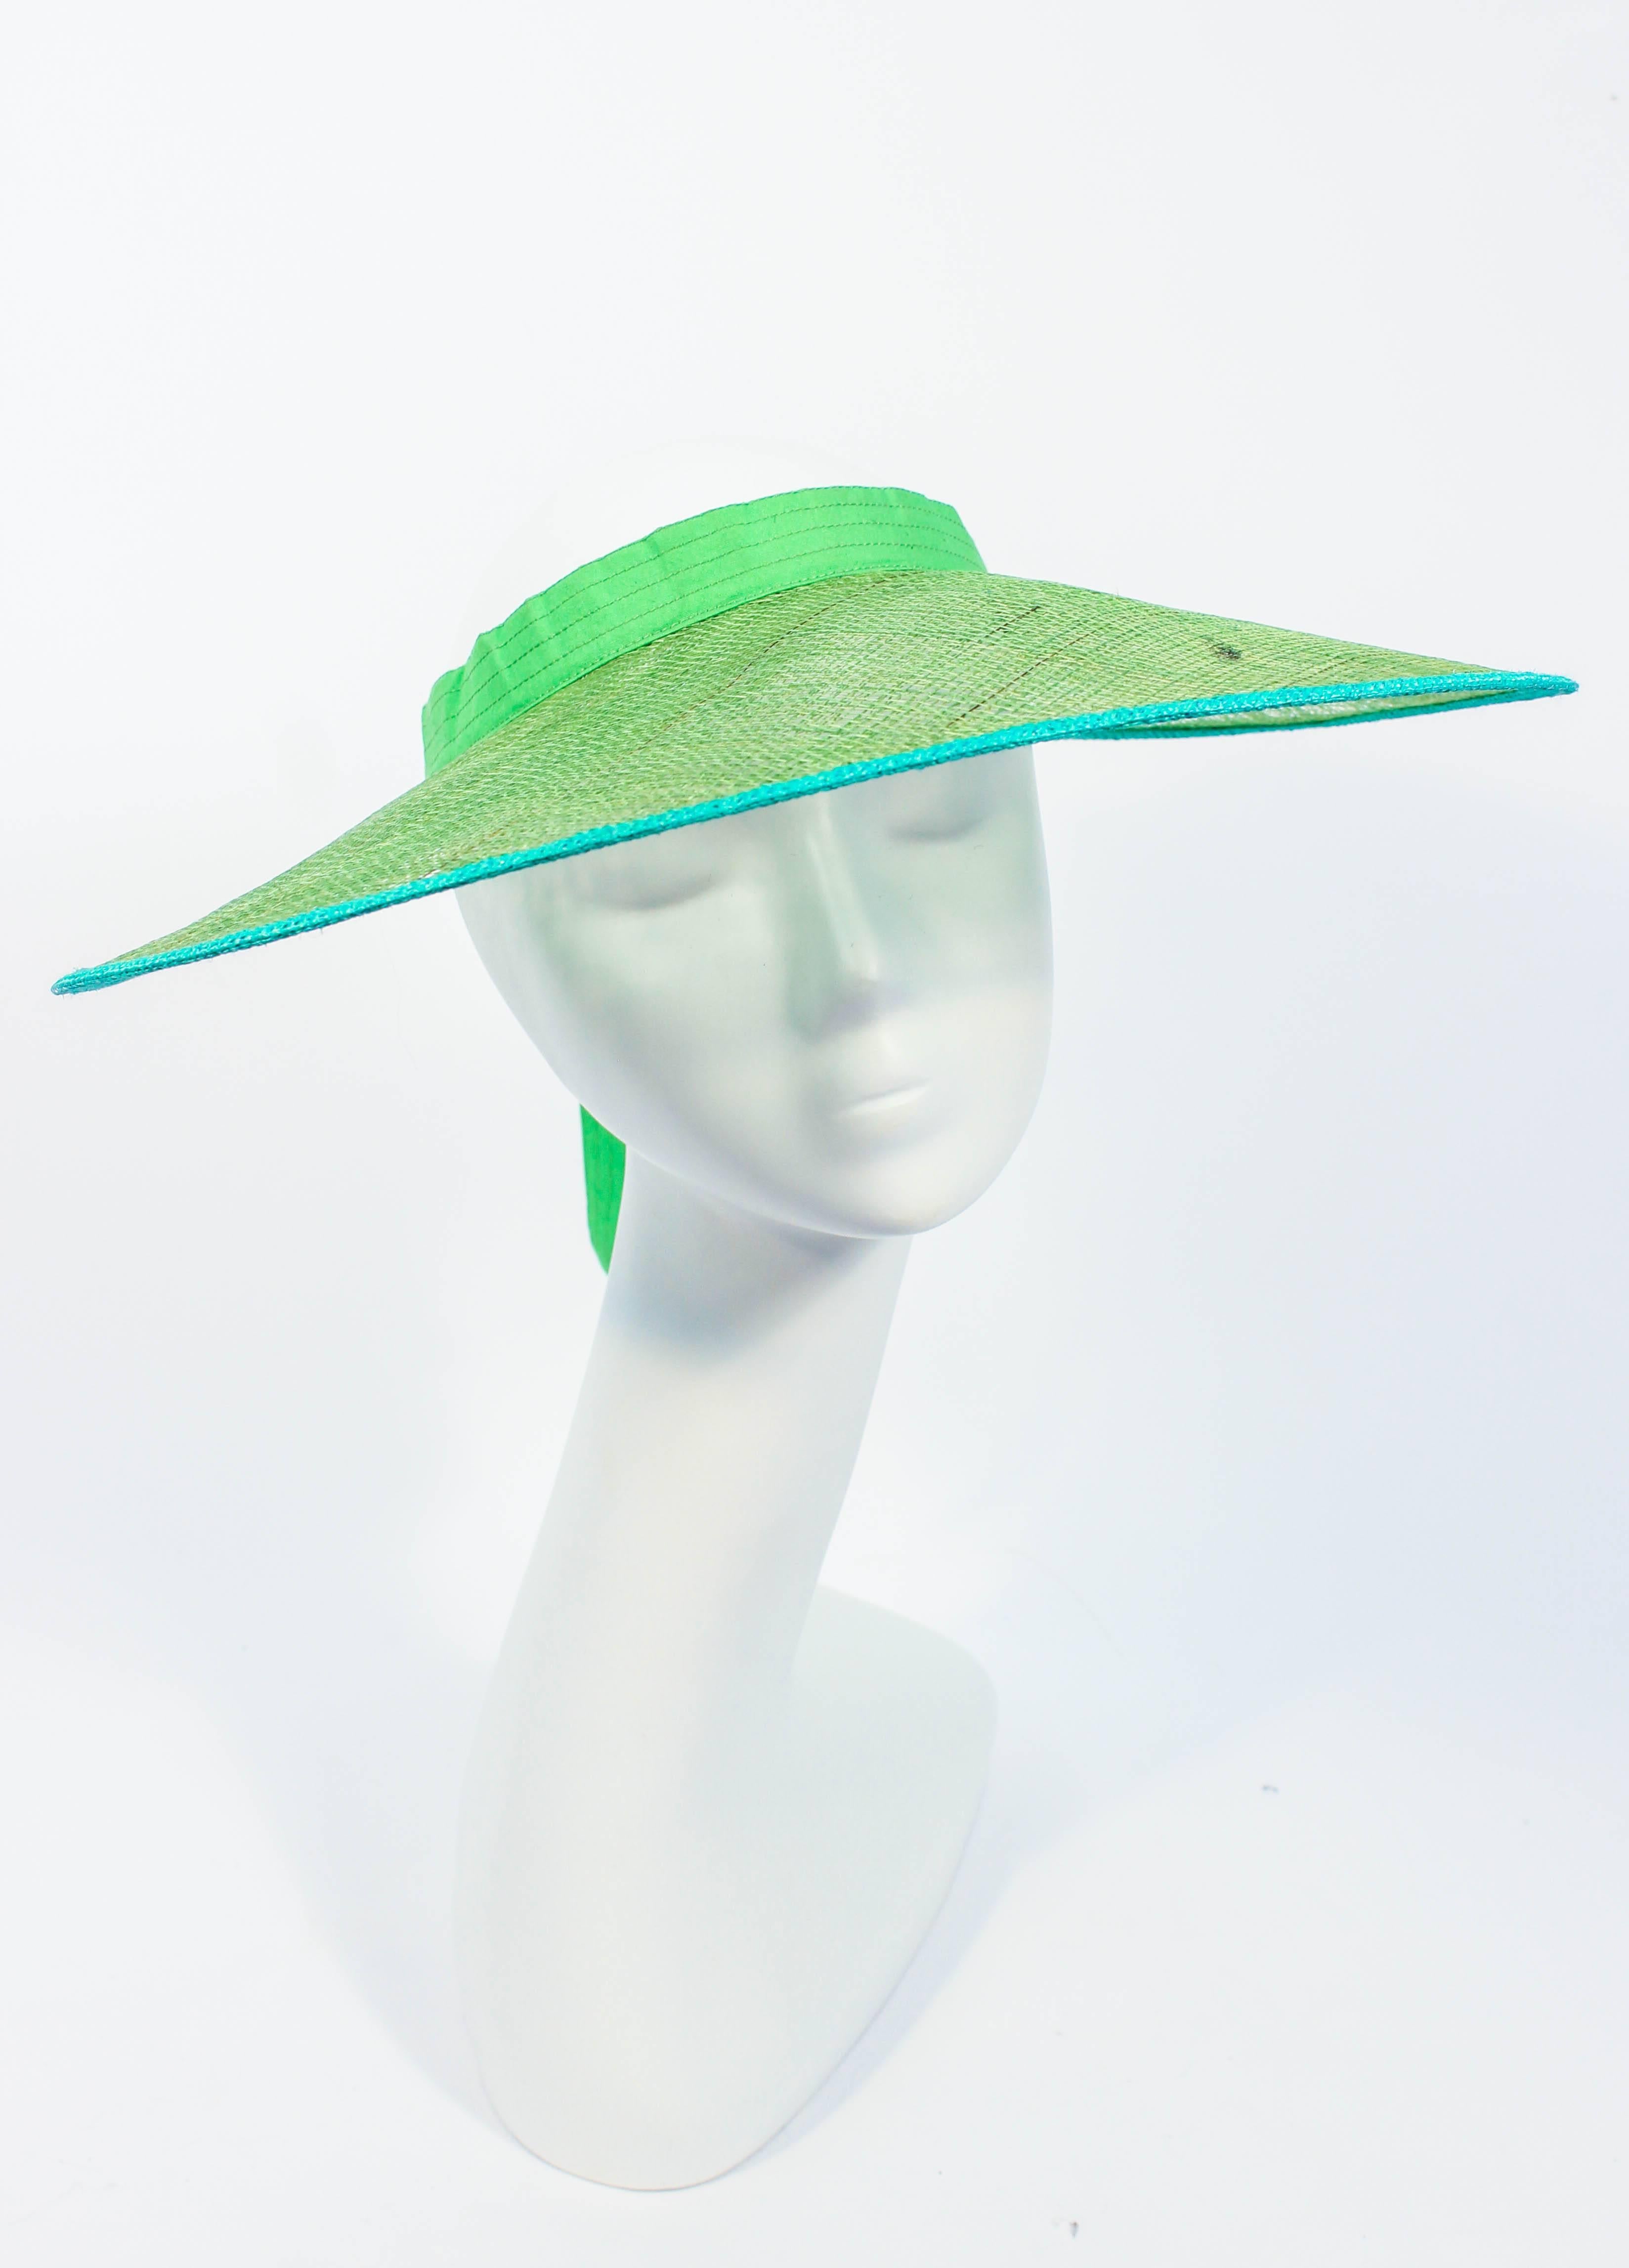 This Yves Saint Laurent hat is composed of green mesh. Features a tie back. Made in France. In excellent vintage condition.

This YSL hat is from an extensive collection I acquired from the estate of a very wealthy lady who chose to live in Paris